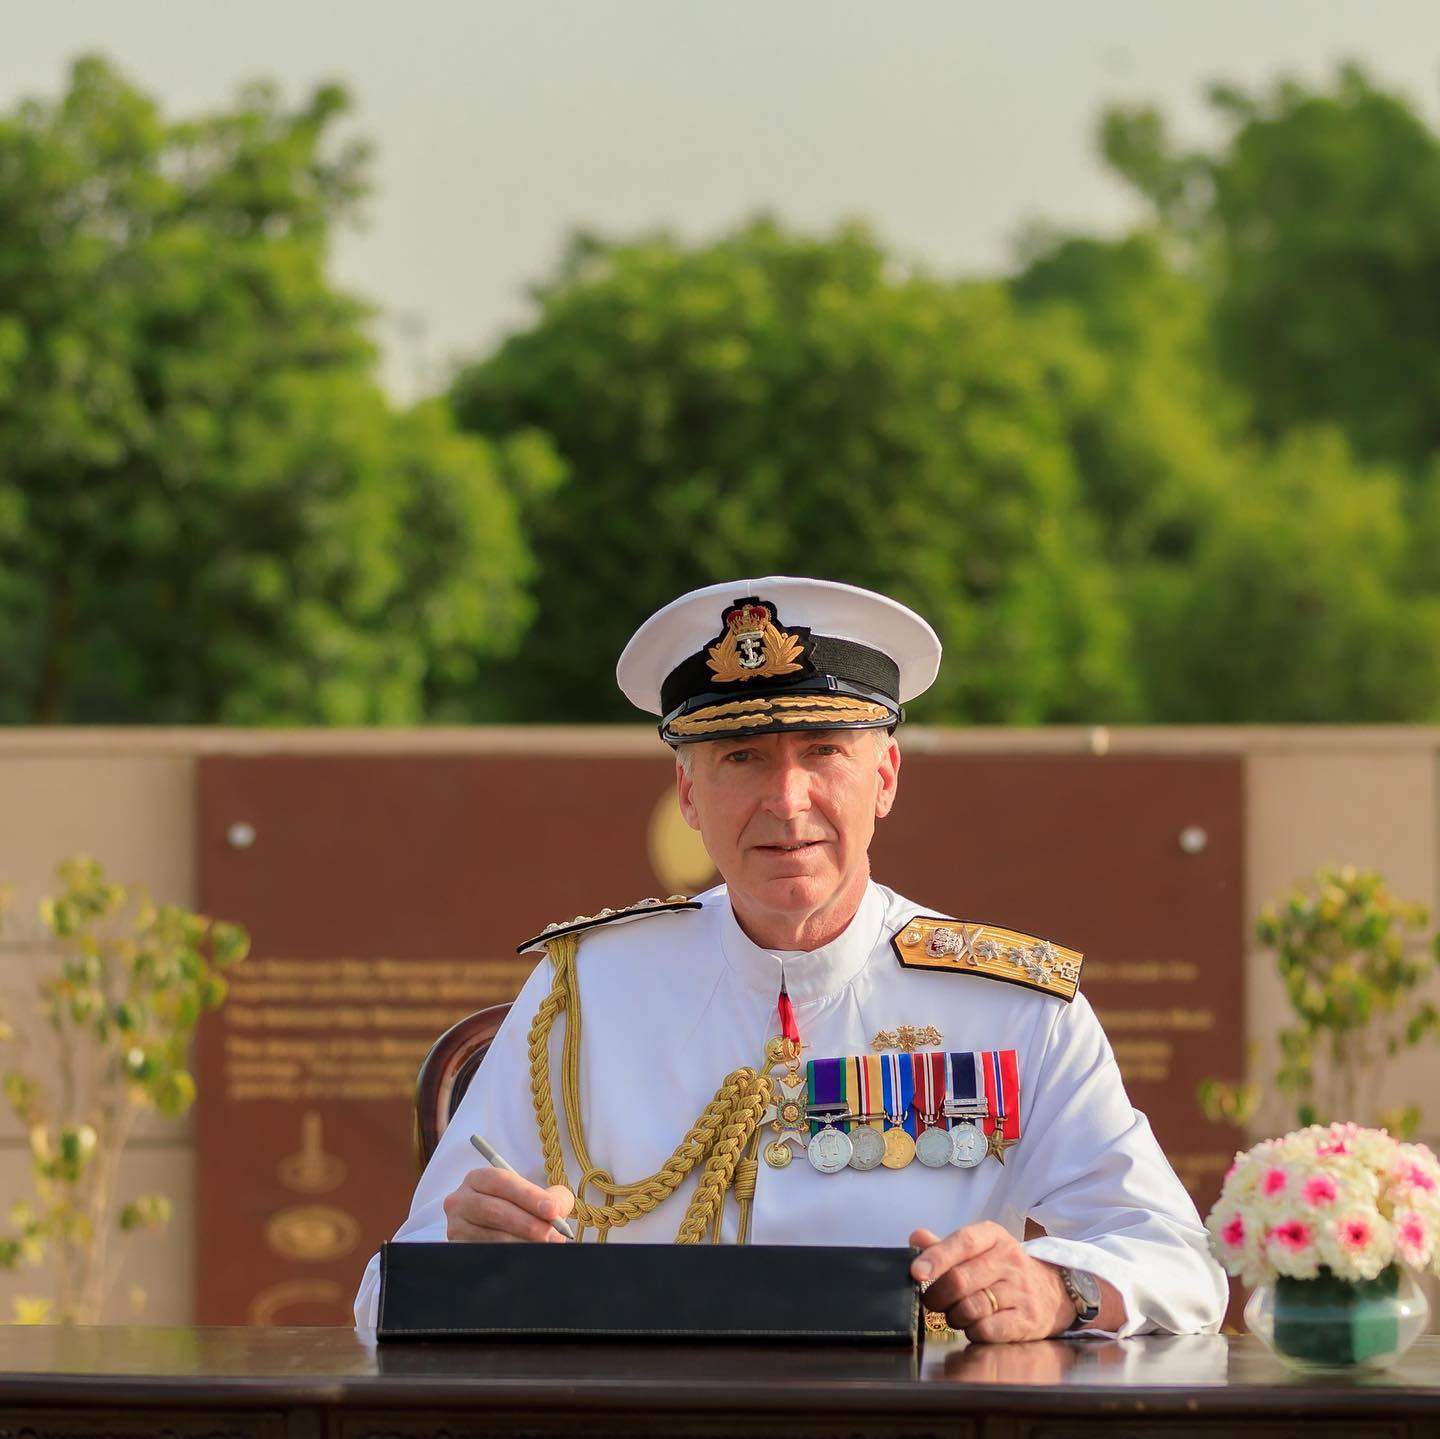 Britain’s Chief of the Defence Staff Admiral Tony Radakin pictured paying homage to India’s armed forces during his time in New Delhi this month. Photo: Instagram / @ukinindia